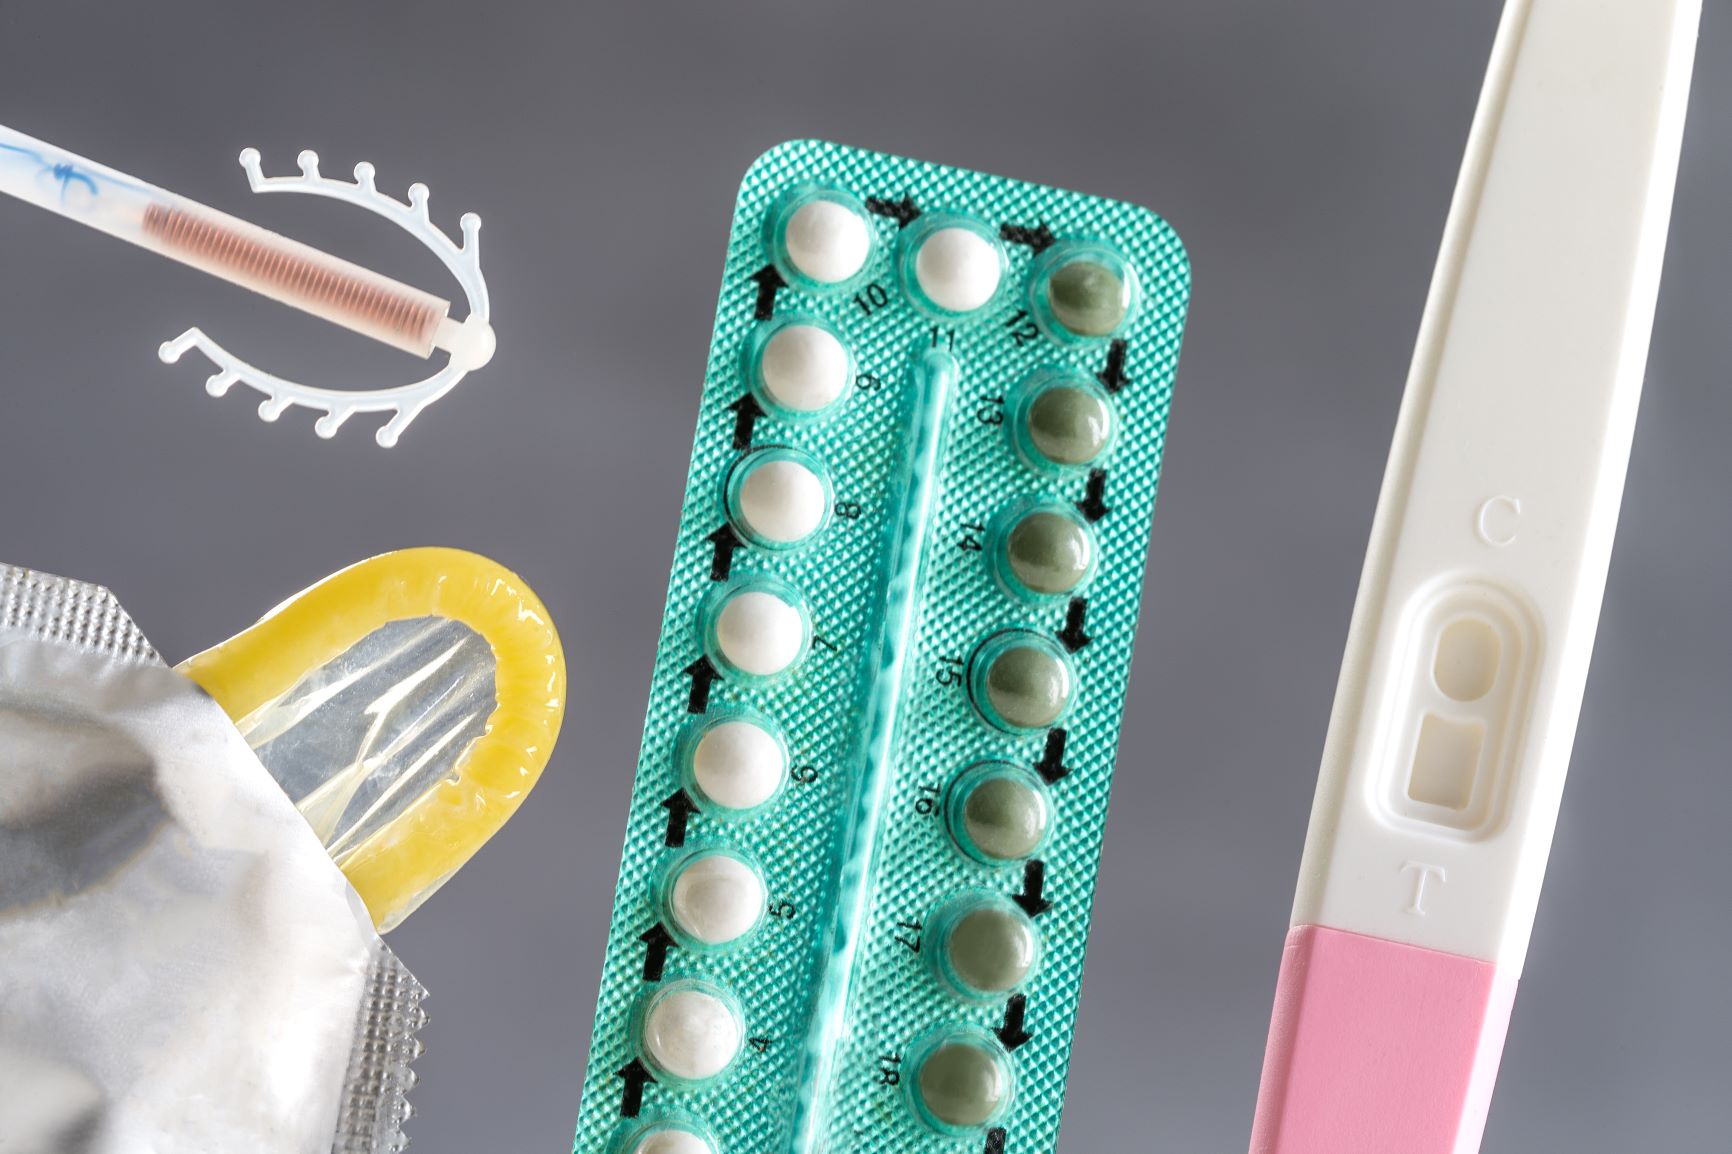 The University Health Center provides a variety of birth control options, including the pill, the shot, the implant and IUDs.